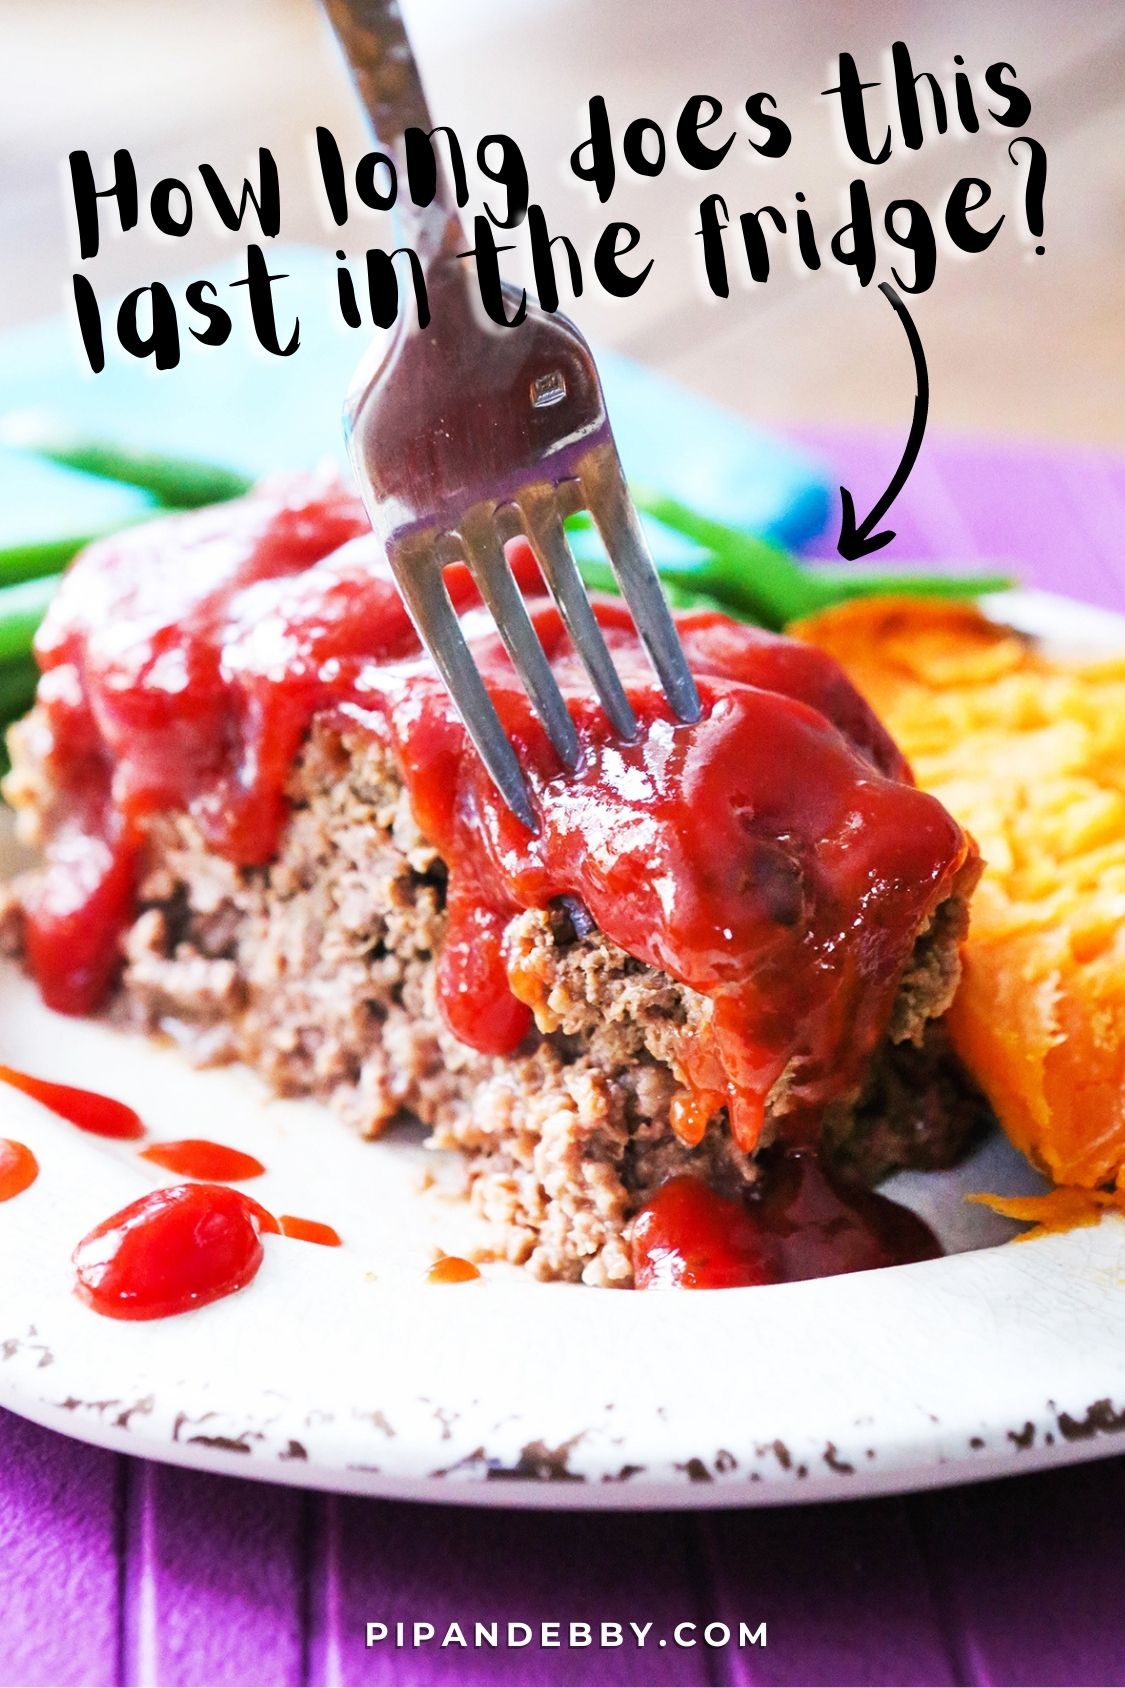 Photo of a fork sticking into a piece of meatloaf with text overlay reading, "How long does this last in the fridge?"